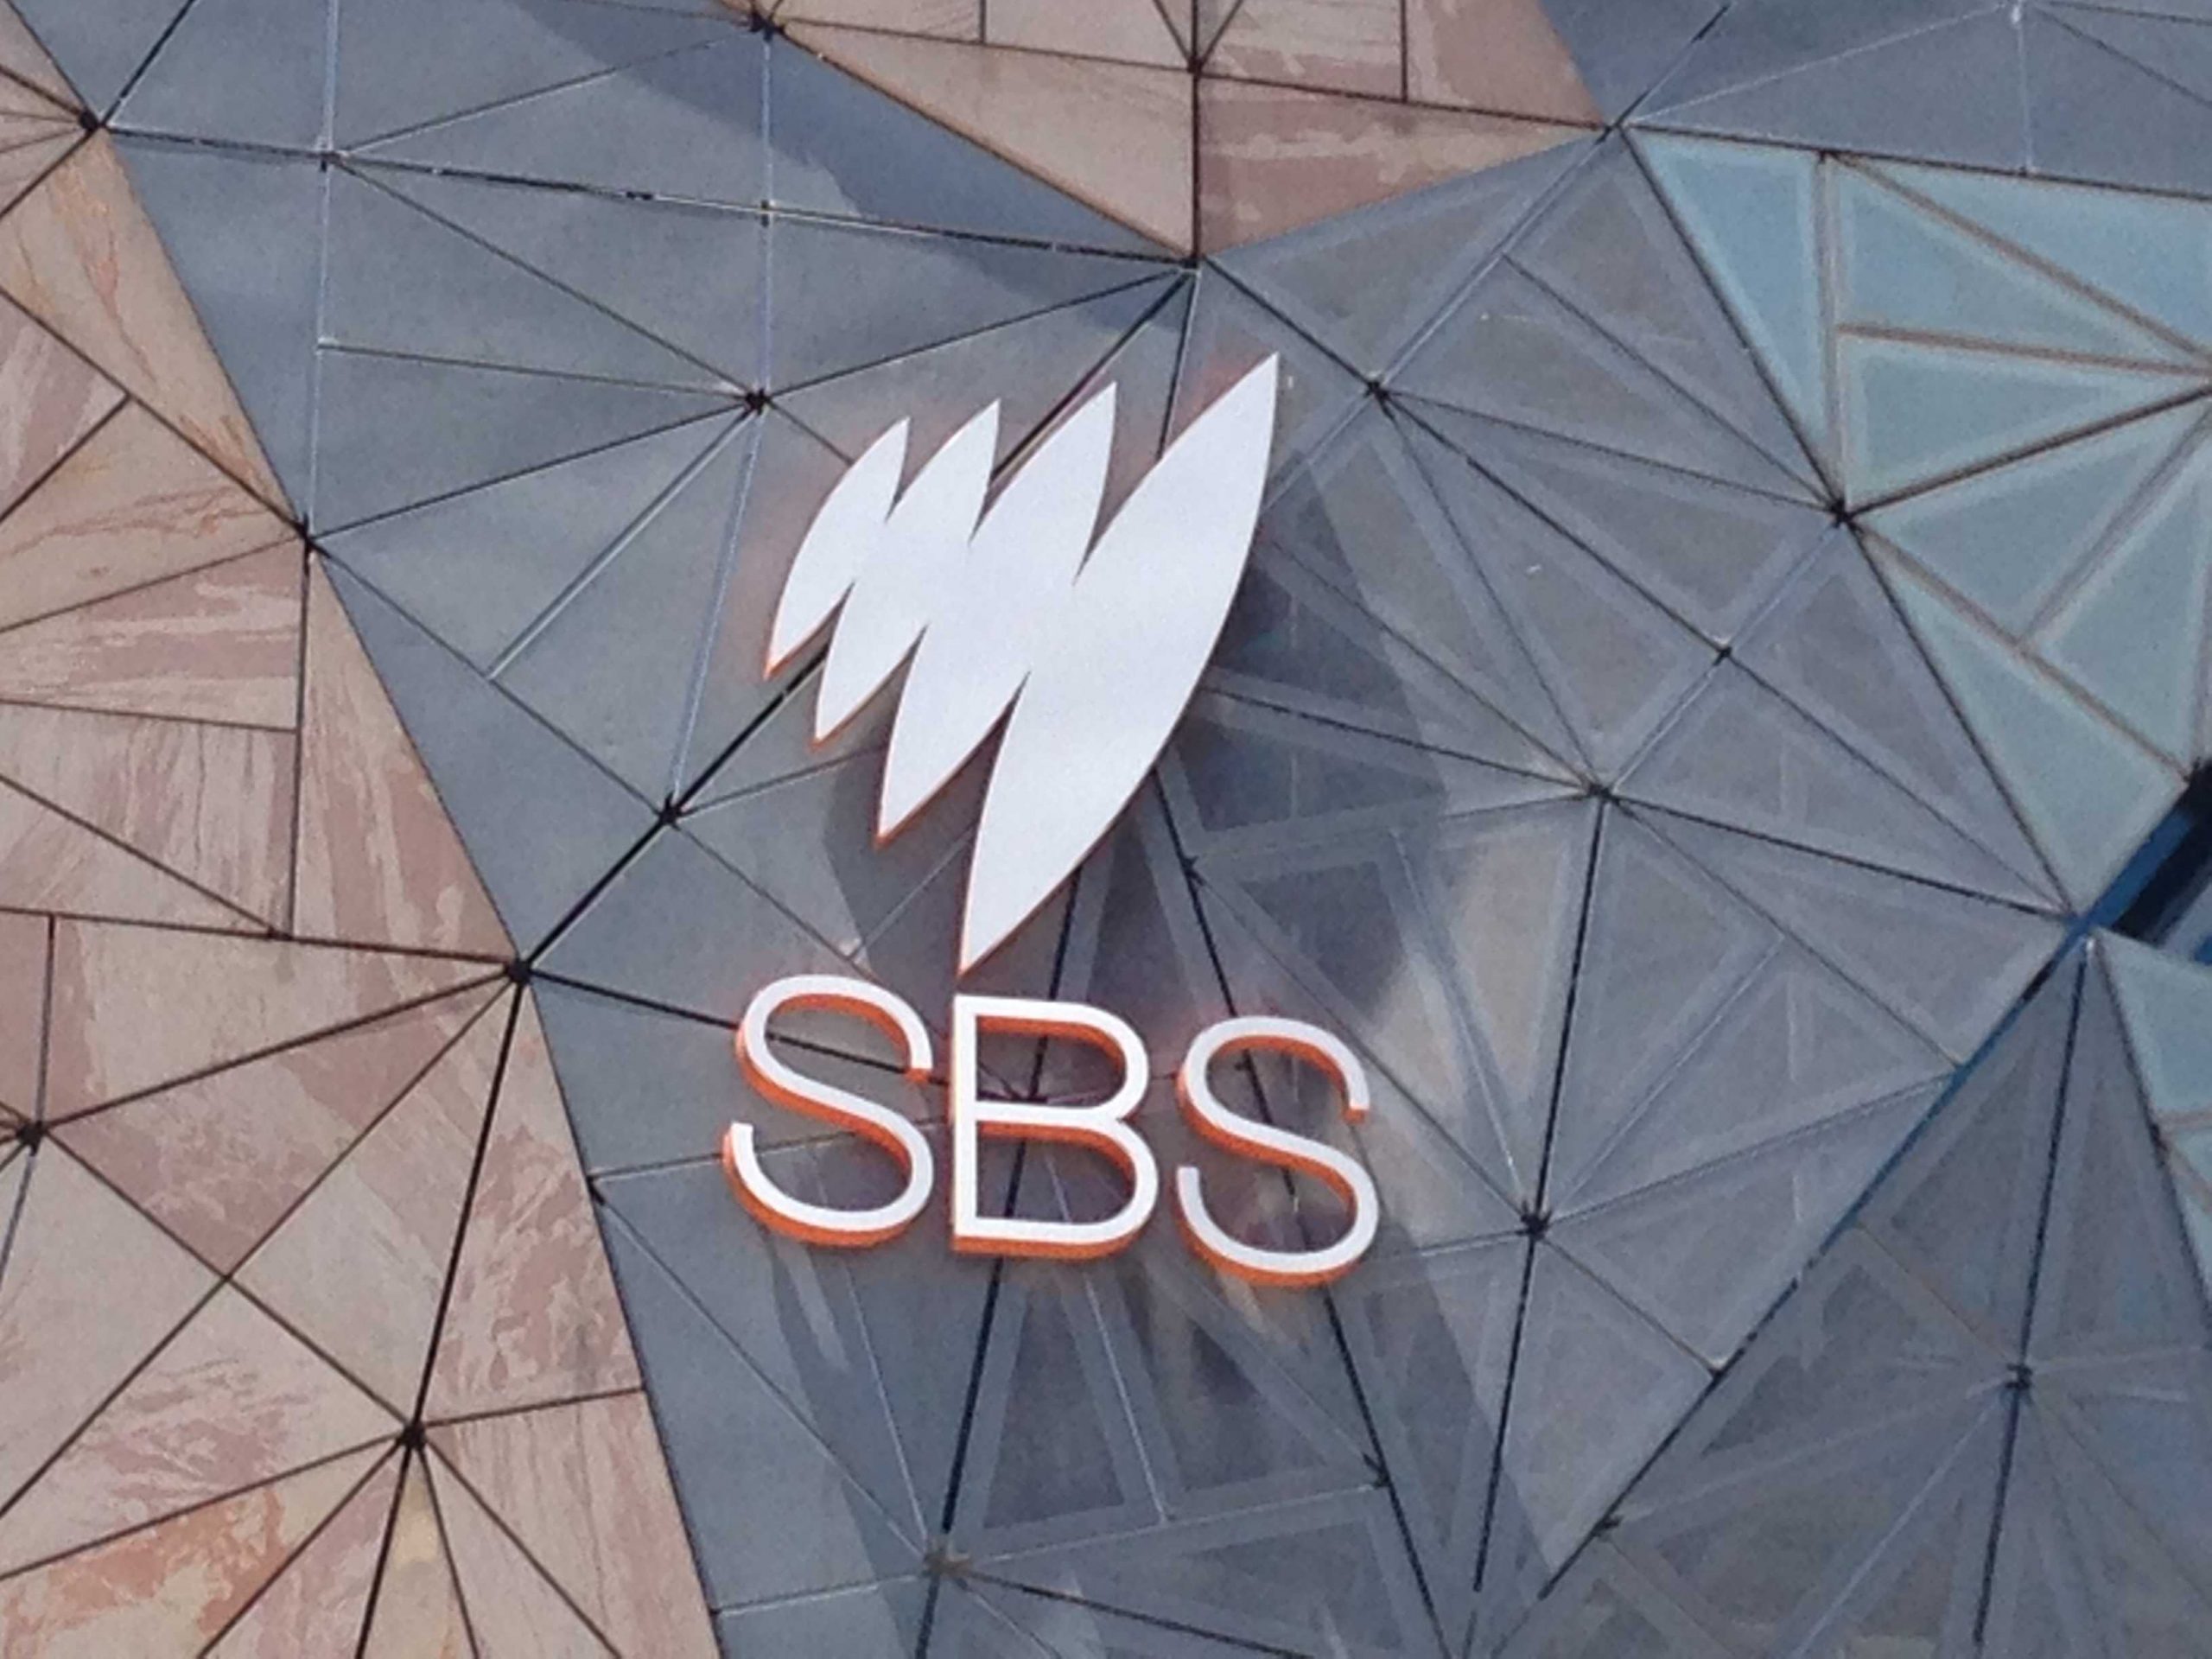 SBS continues to alienate and betray its audience